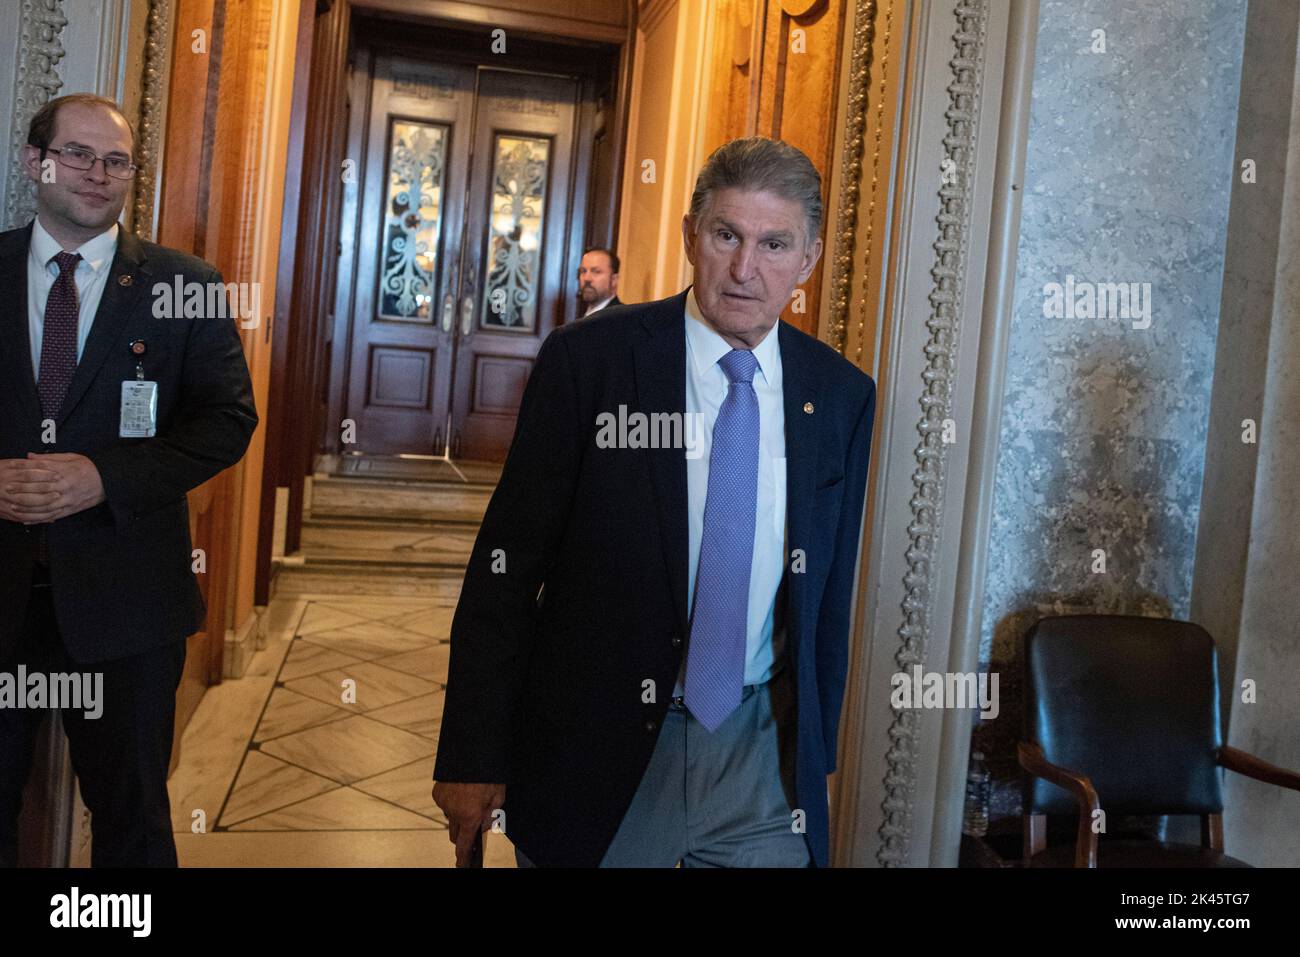 Washington, United States Of America. 29th Sep, 2022. United States Senator Joe Manchin III (Democrat of West Virginia), exits the US Senate Chamber after voting on the a Continuing Resolution which, if passed, will fund the US government from October 1 through December 16, in the US Capitol in Washington, DC, Thursday, September 29, 2022. Credit: Cliff Owen/CNP/Sipa USA Credit: Sipa USA/Alamy Live News Stock Photo